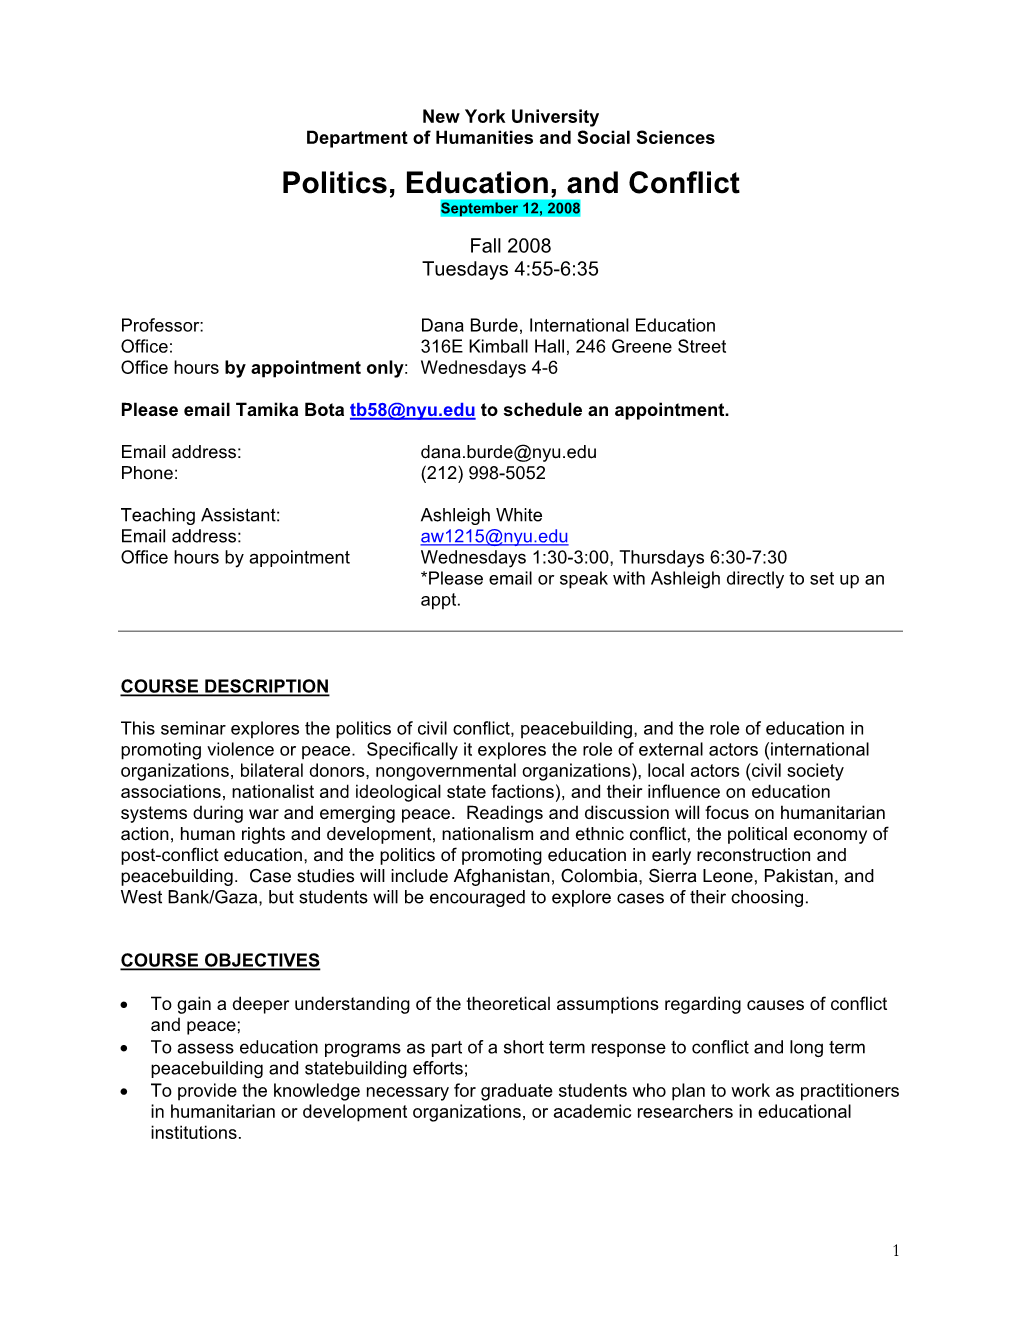 Politics, Education, and Conflict September 12, 2008